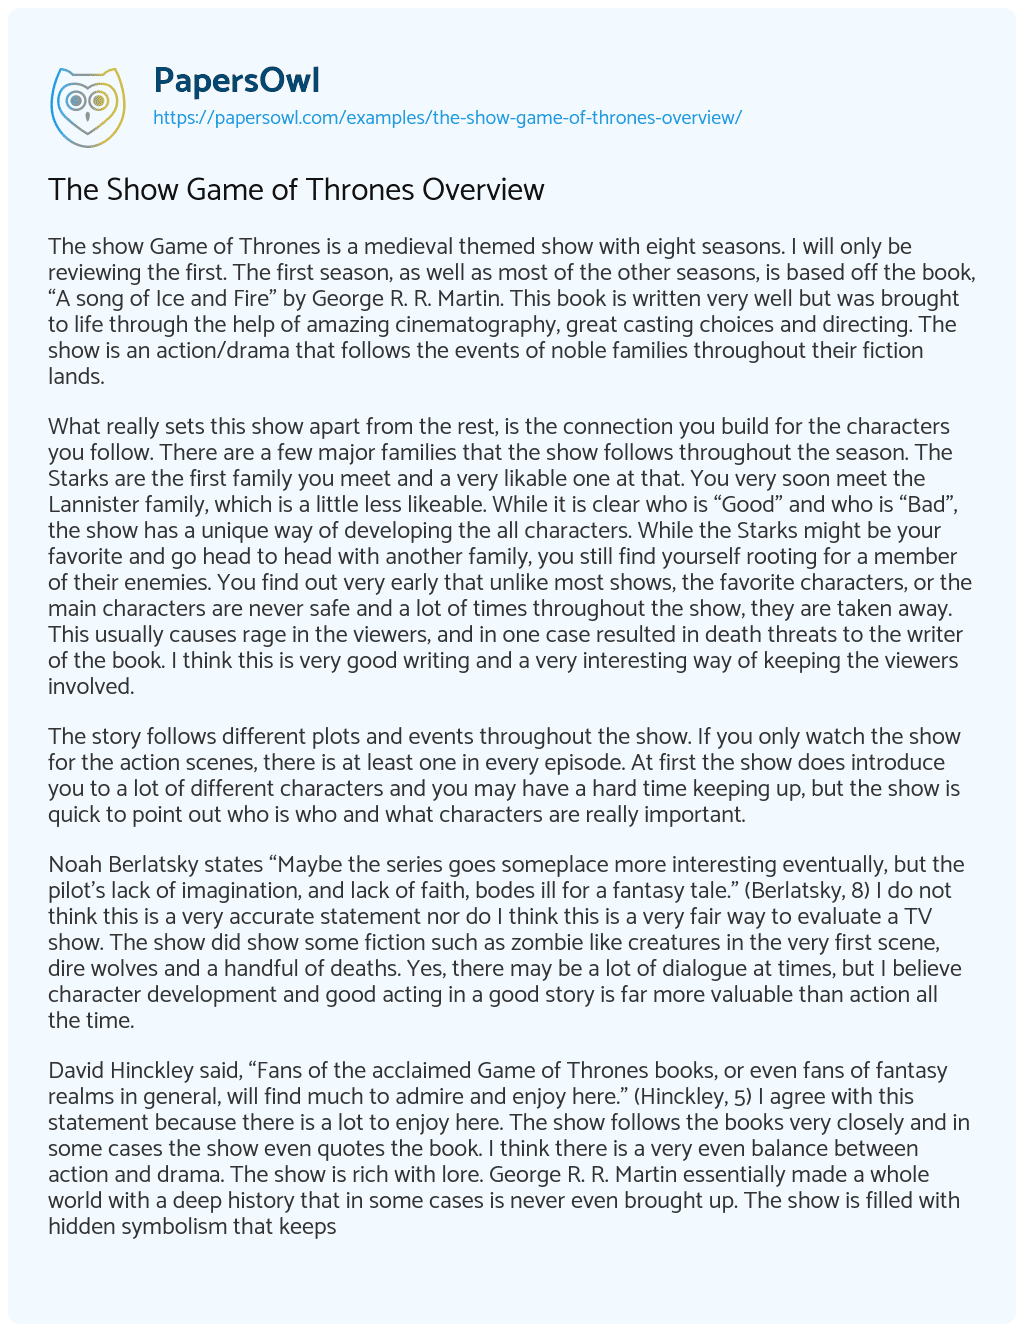 Essay on The Show Game of Thrones Overview